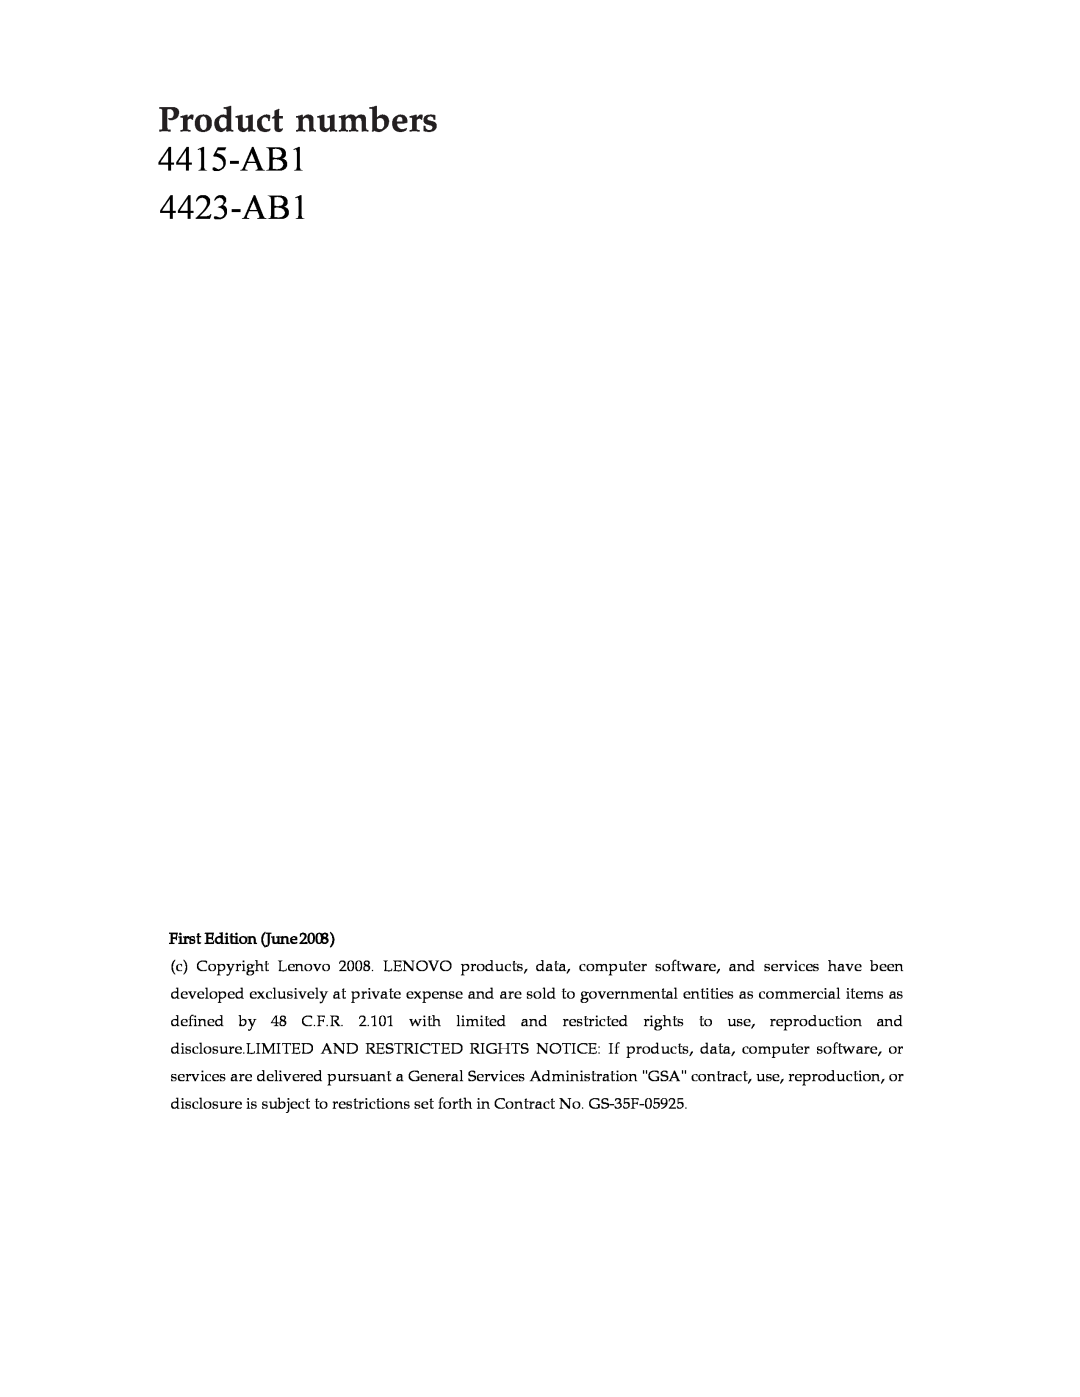 Lenovo manual Product numbers 4415-AB1, 4423-AB1, First Edition June 